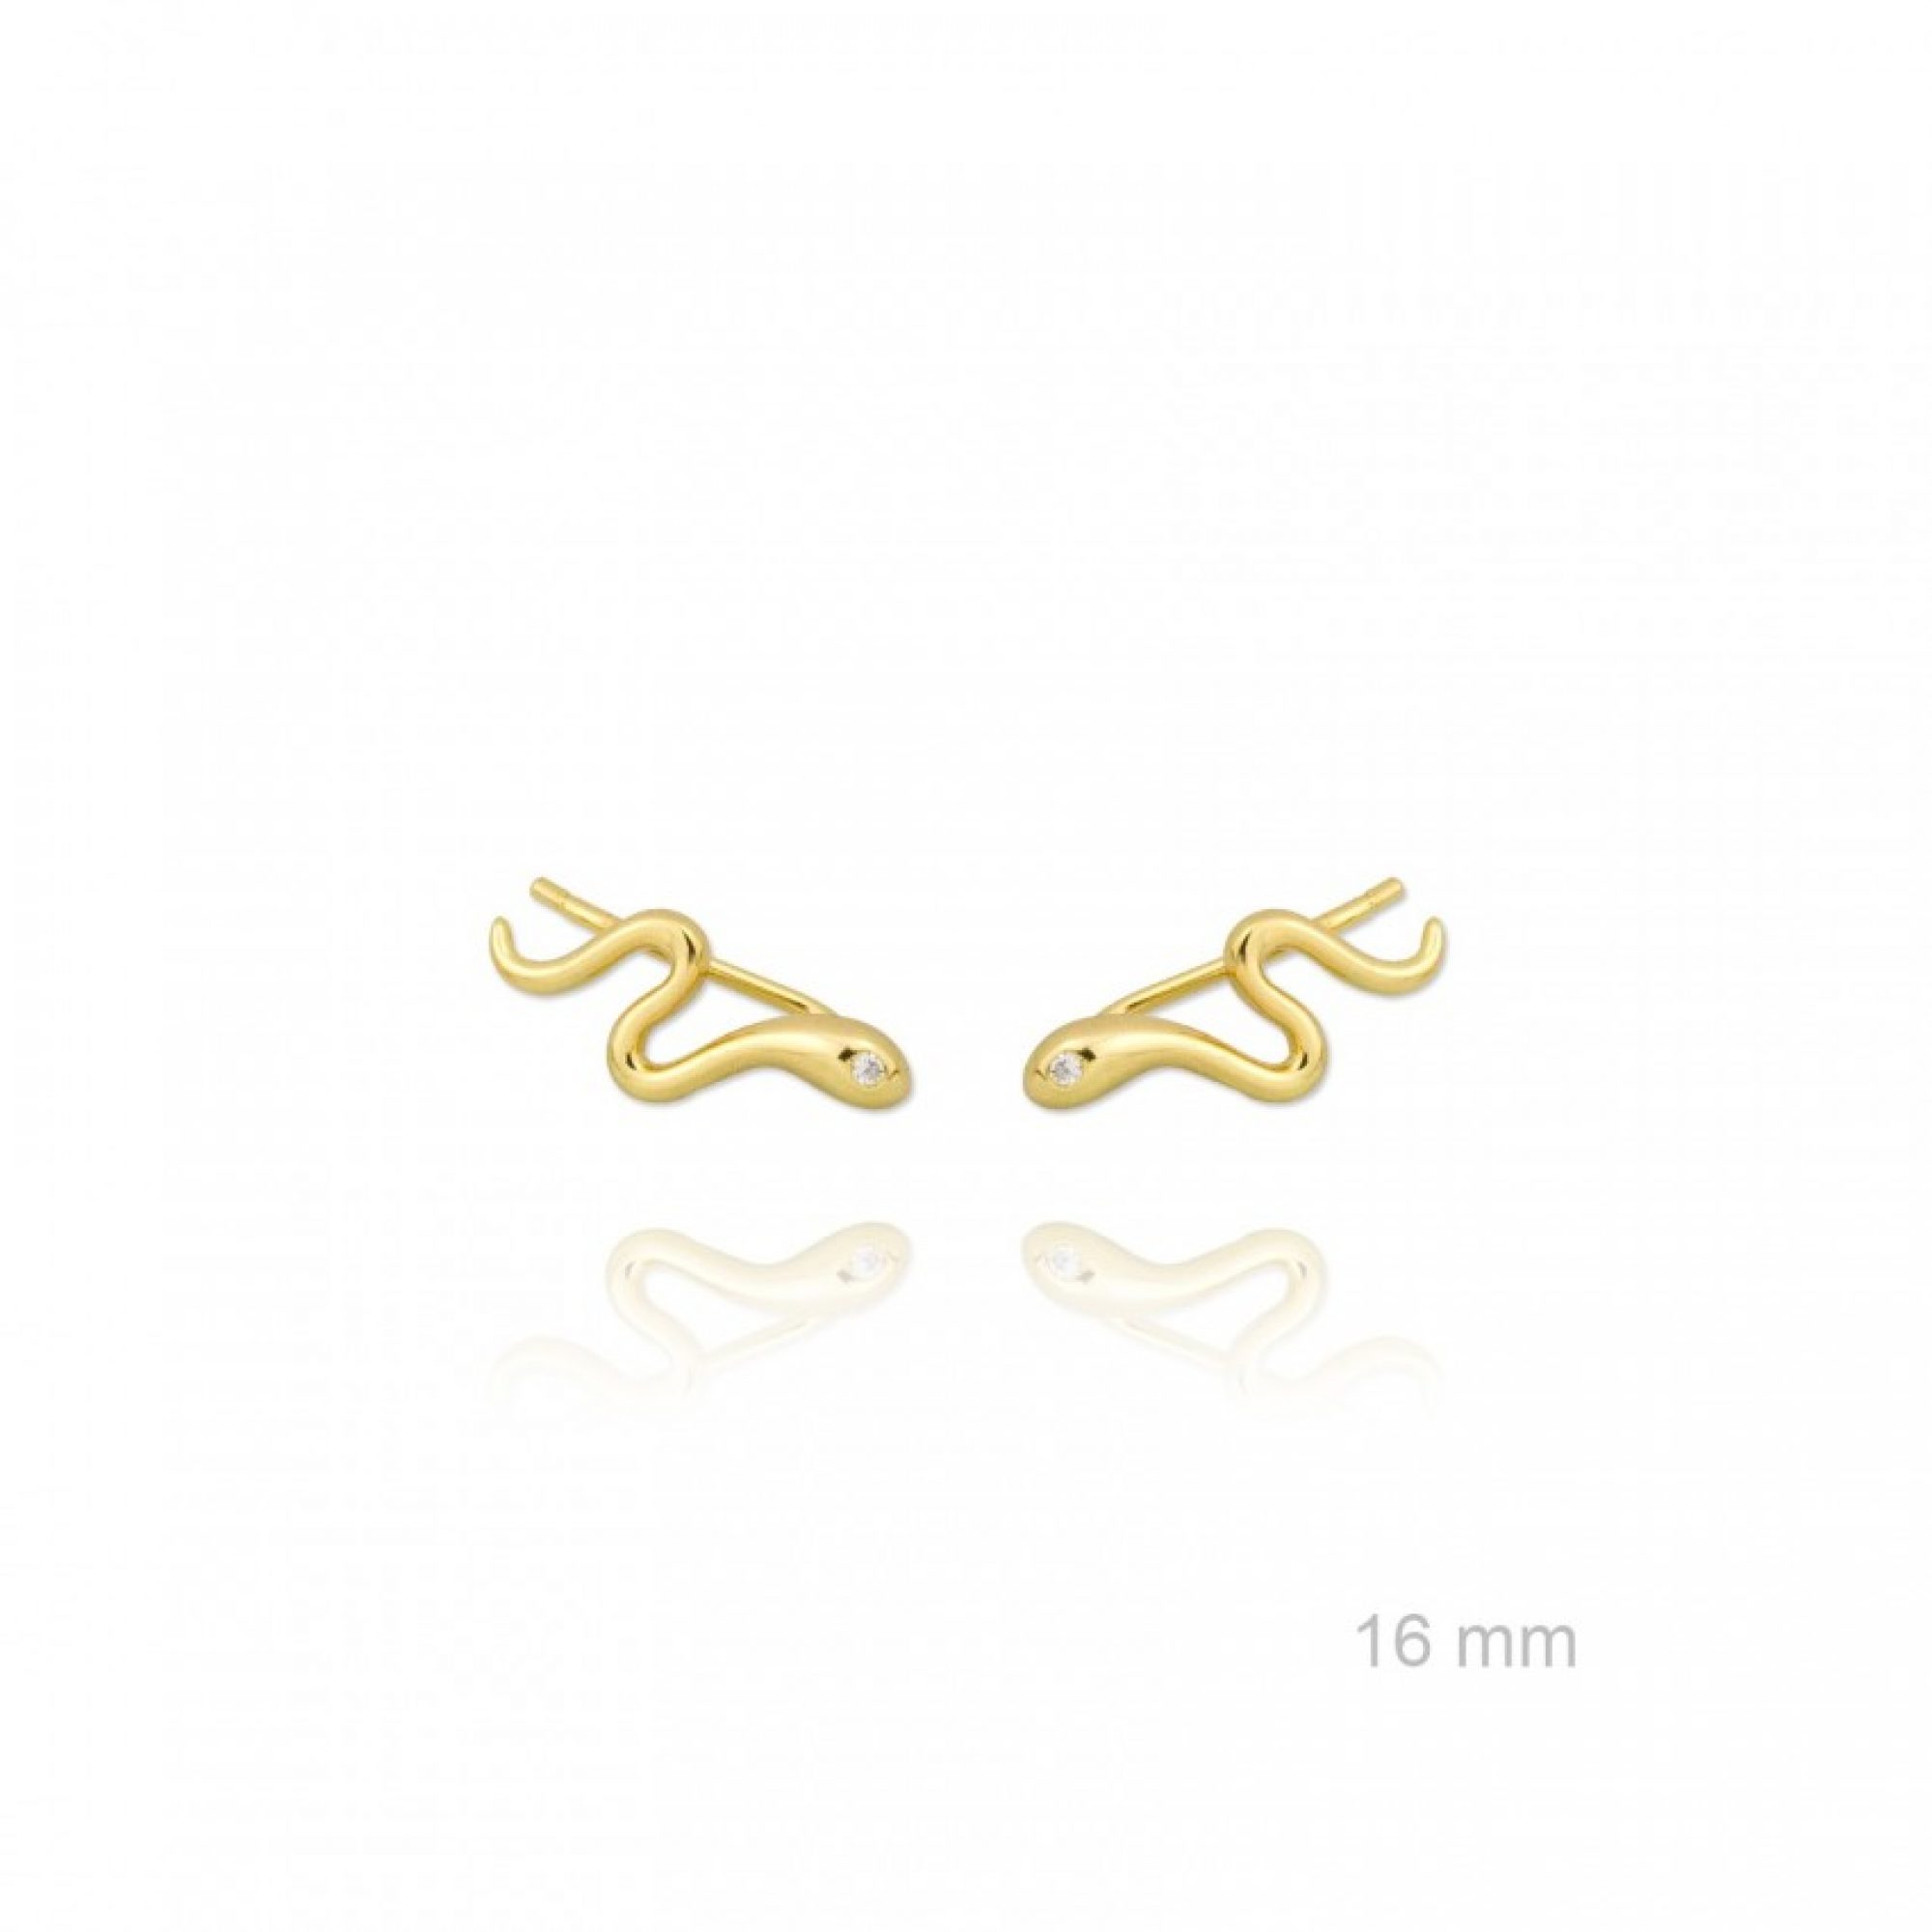 Gold plated snake ear climbers